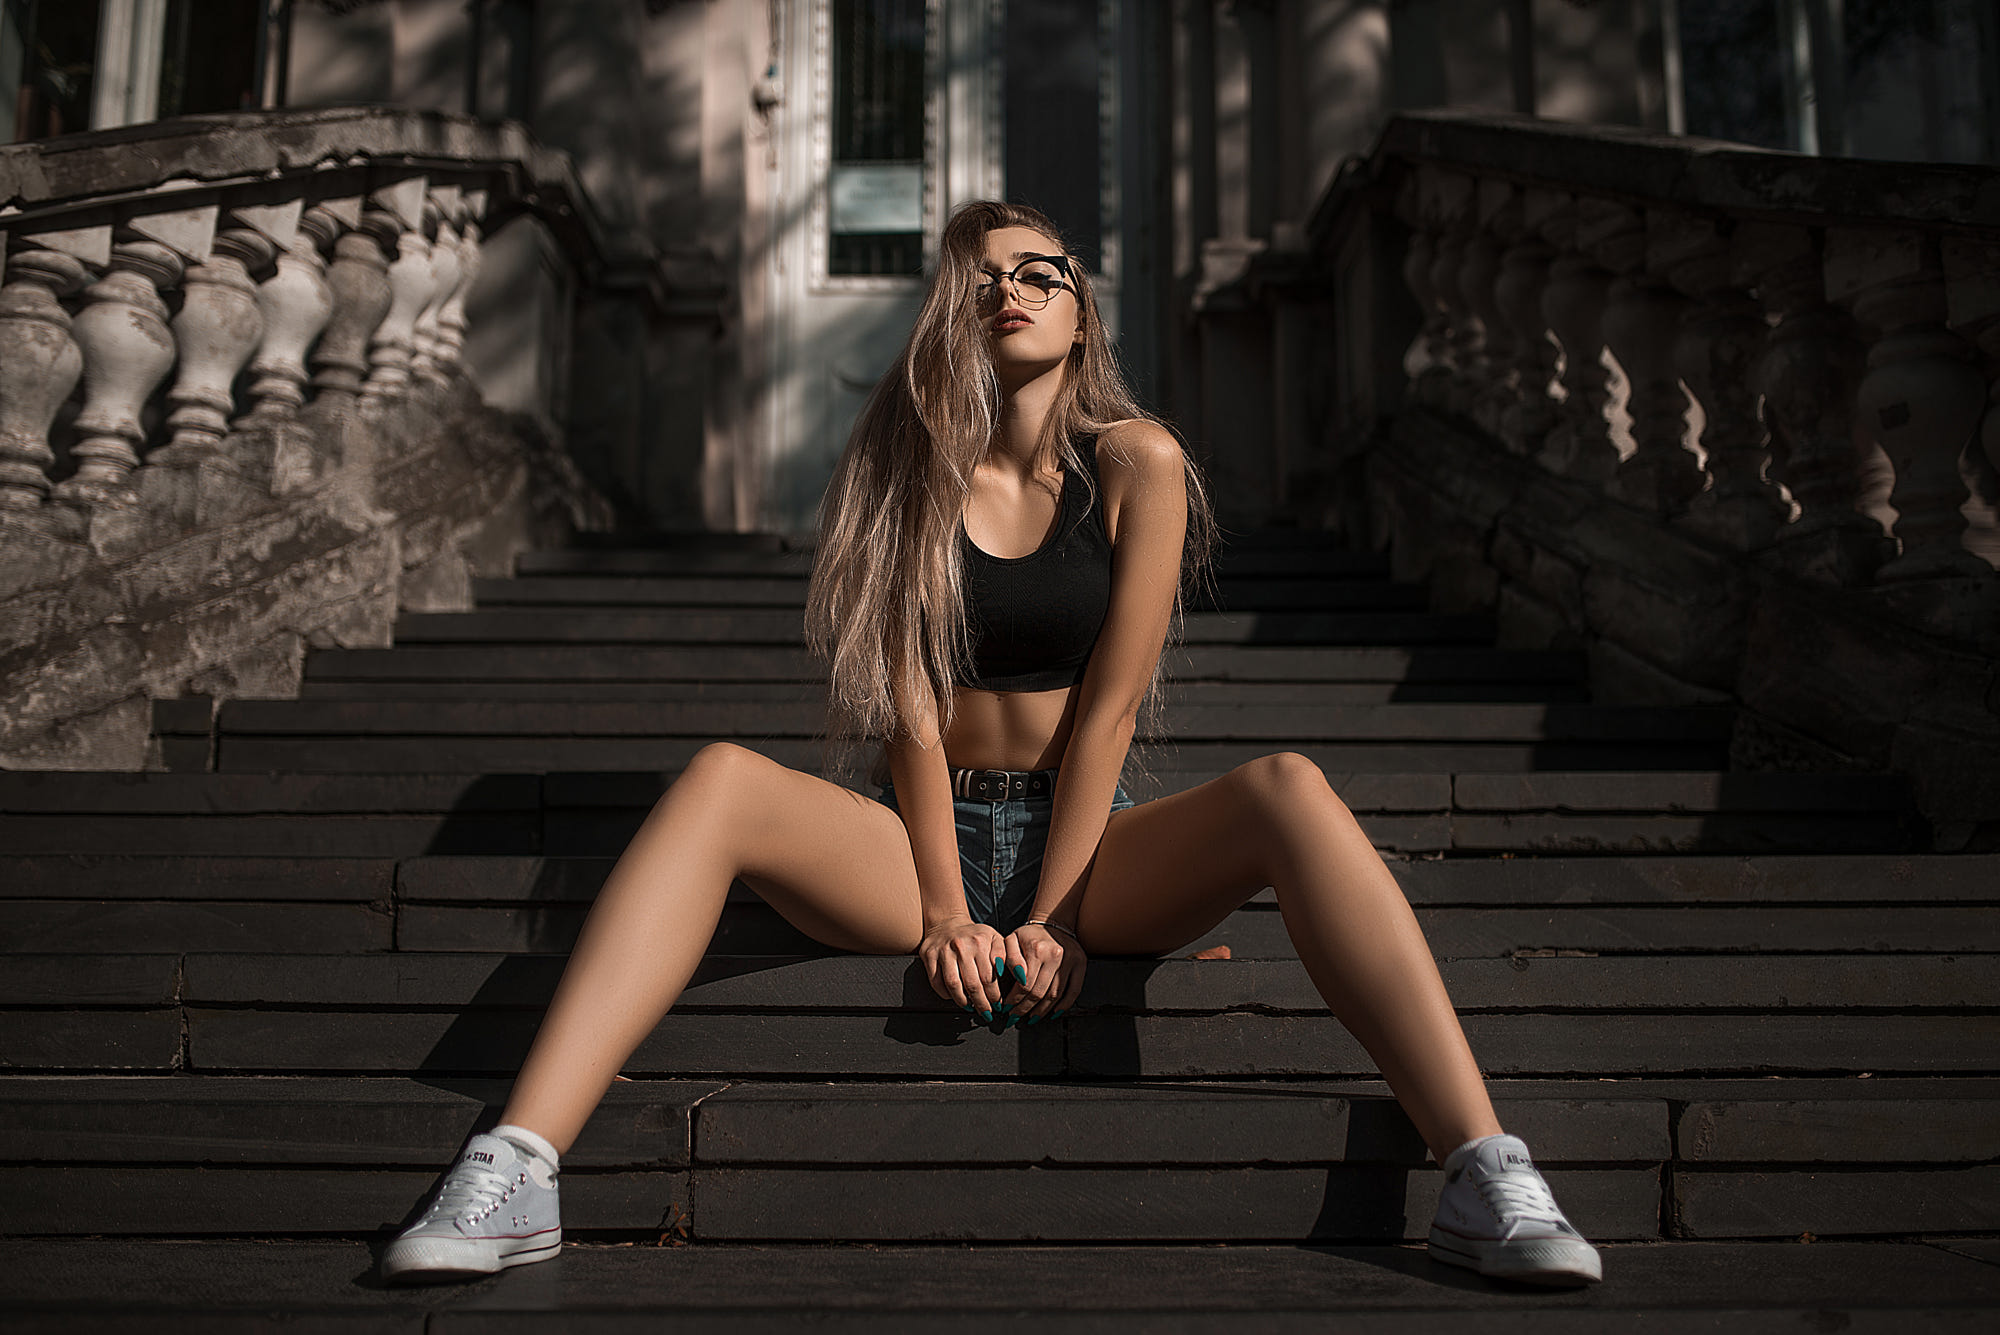 People 2000x1335 women long hair sitting jean shorts belt black top stairs women with glasses women outdoors glasses Converse painted nails brunette sneakers blonde